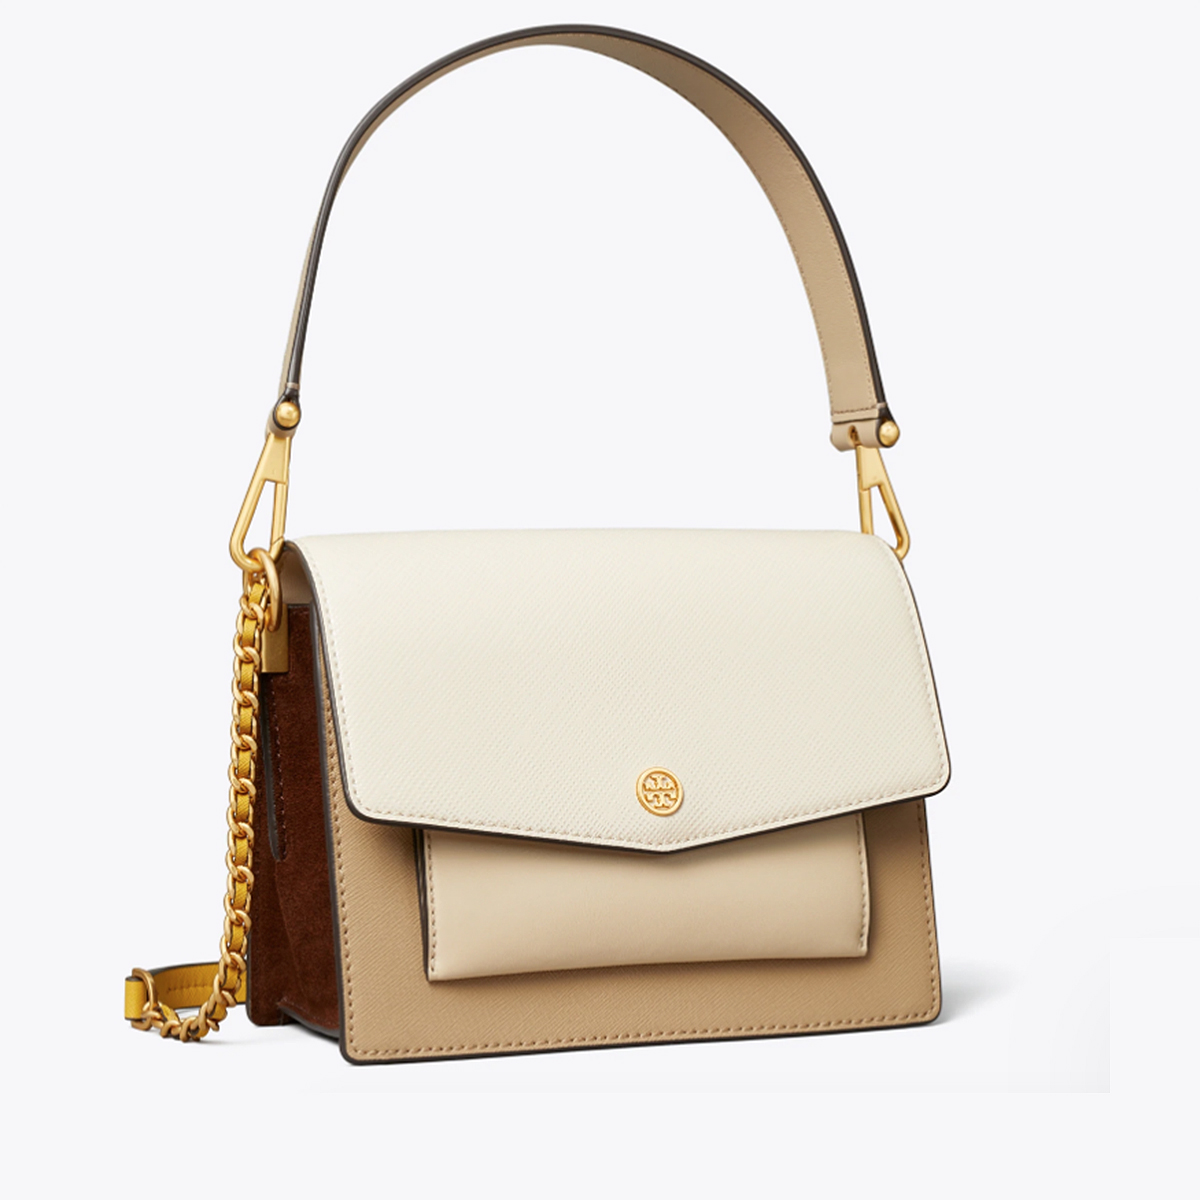 Take Over $90 Off This Tory Burch Purse at 's Holiday Dash